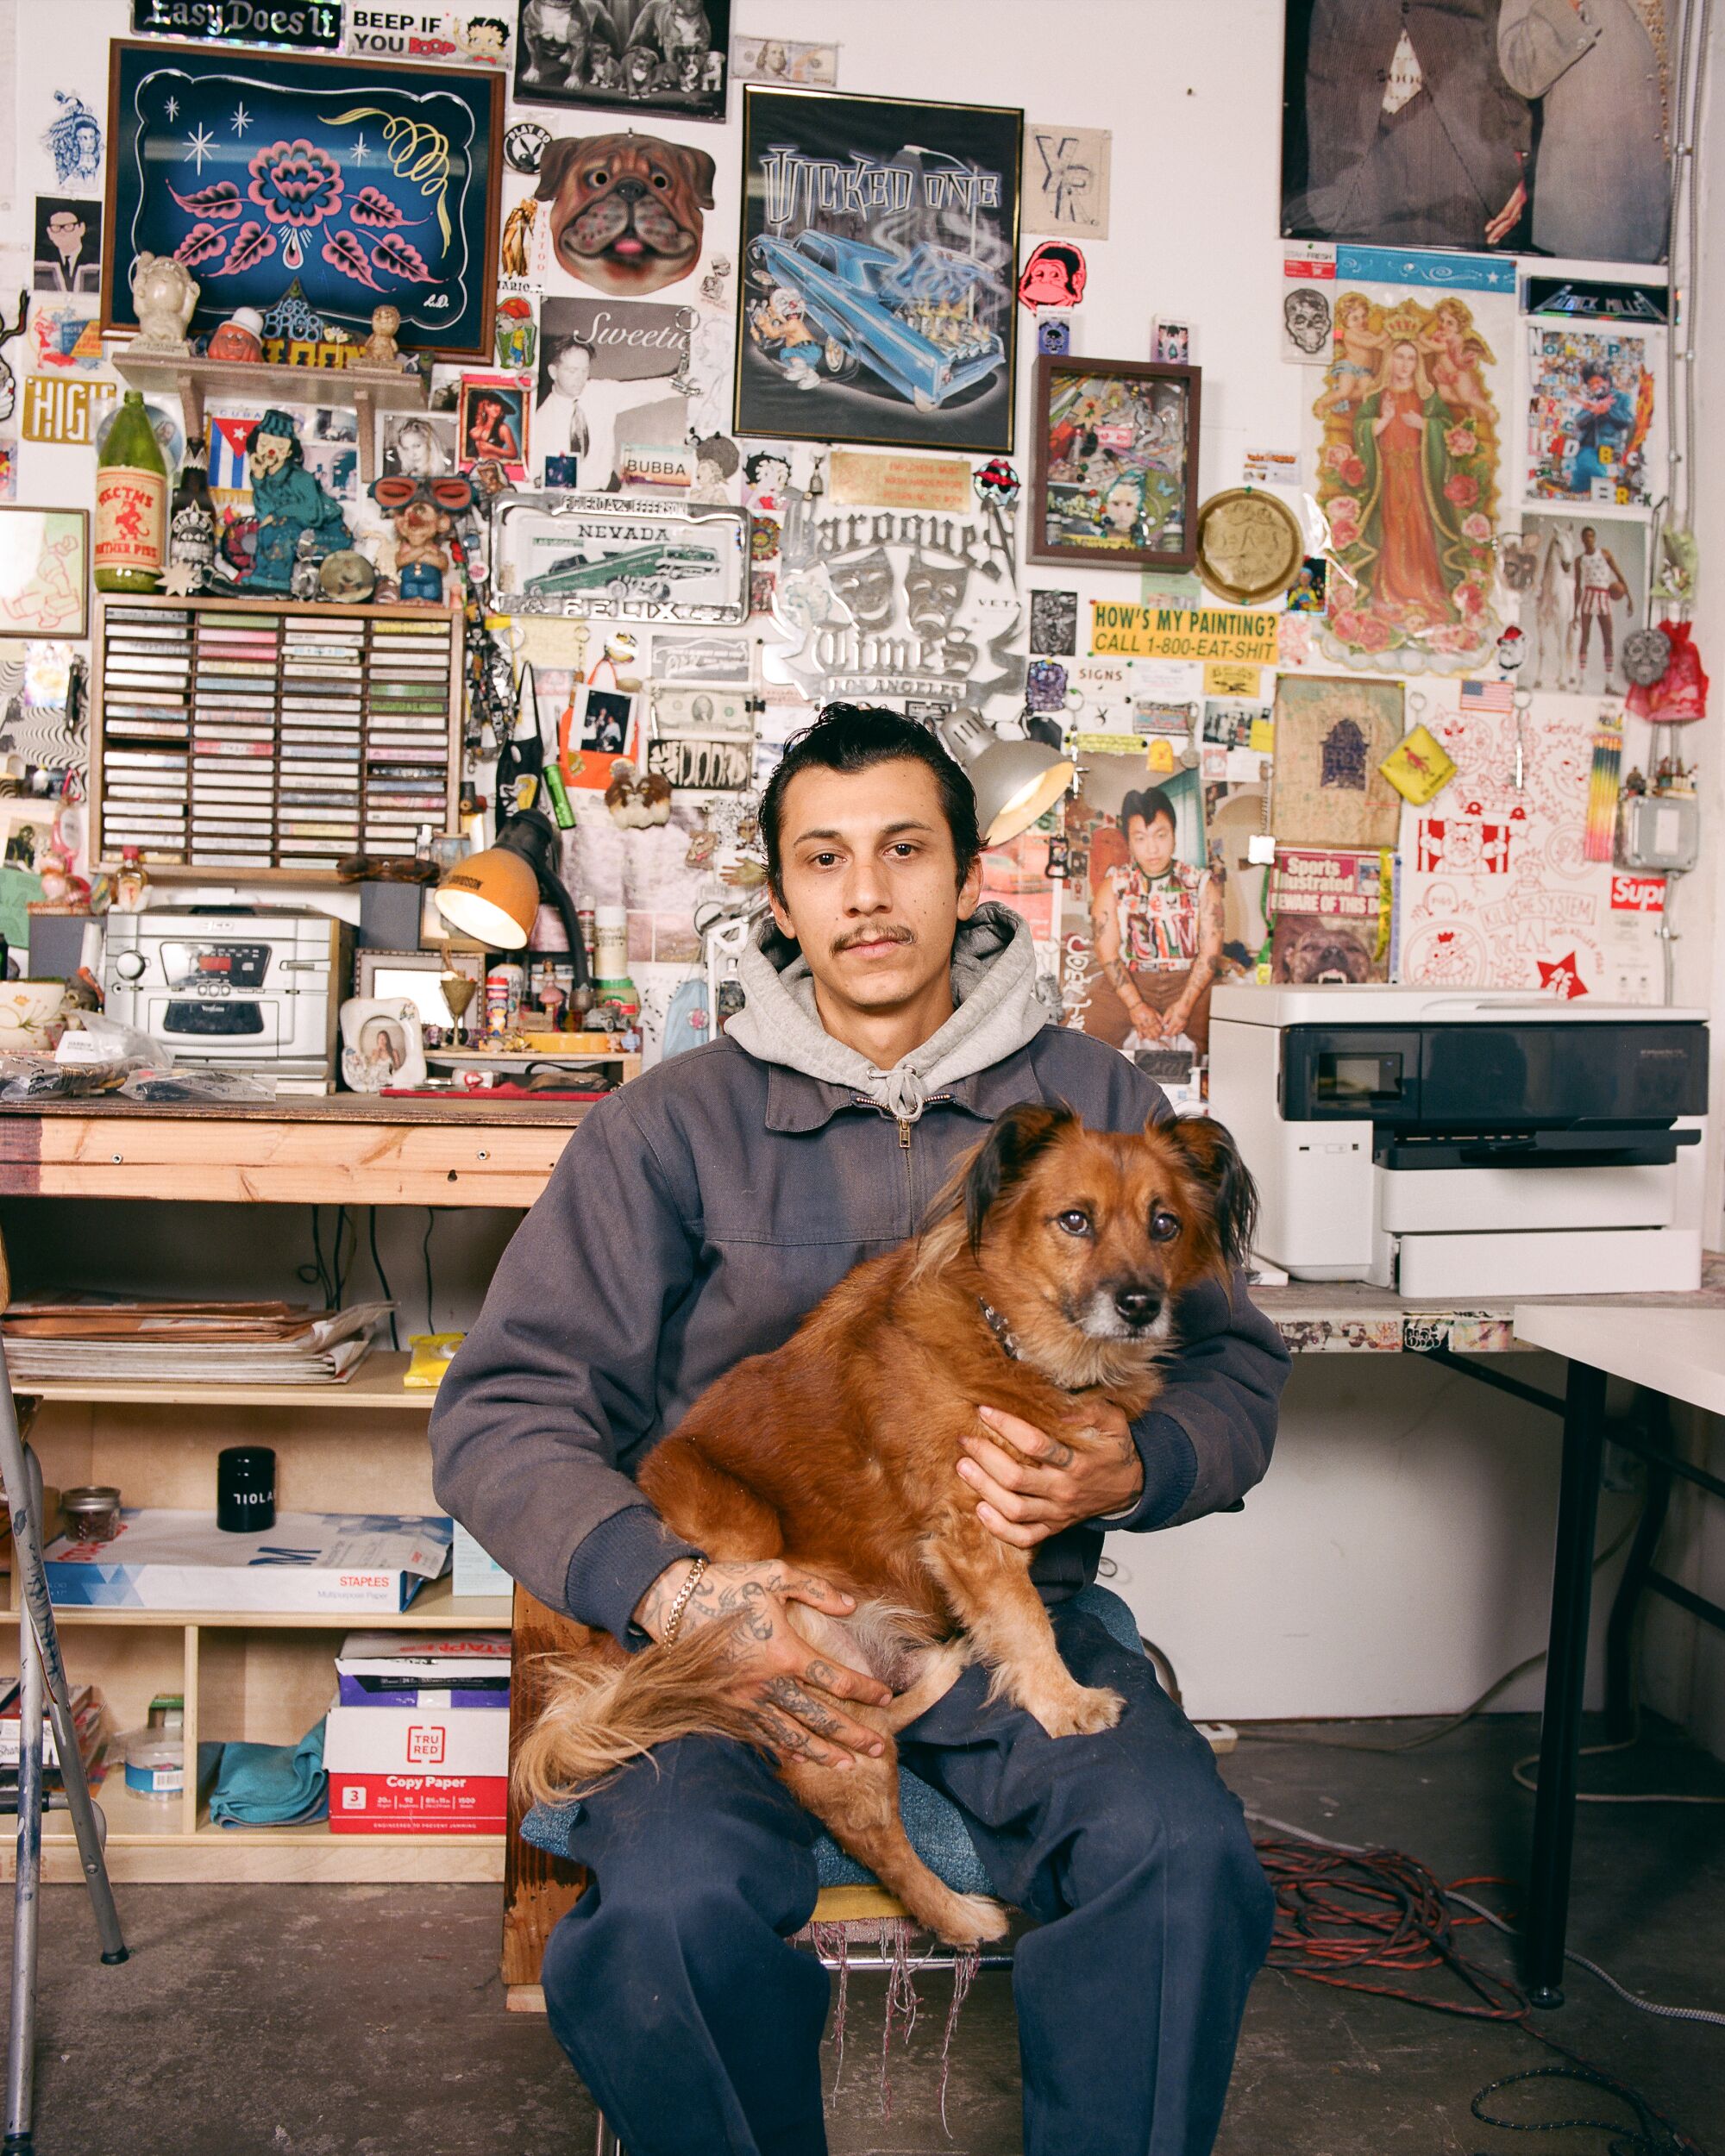 Mario Ayala in his studio with his dog, both looking intently at the camera